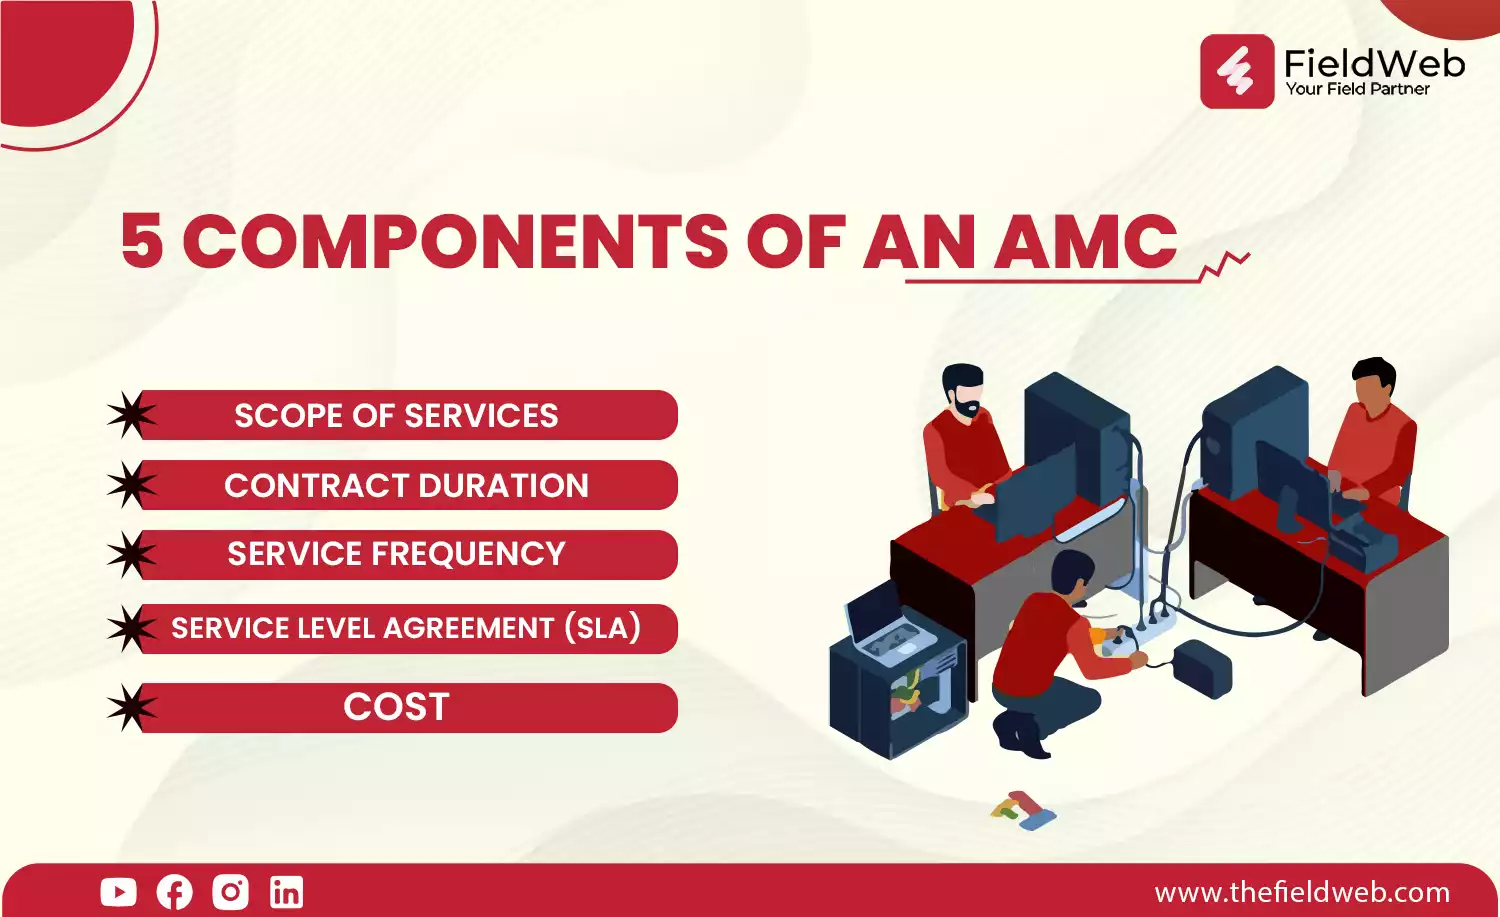 image is displaying 3 technician repairing the computer showing the 5 components of amc management software